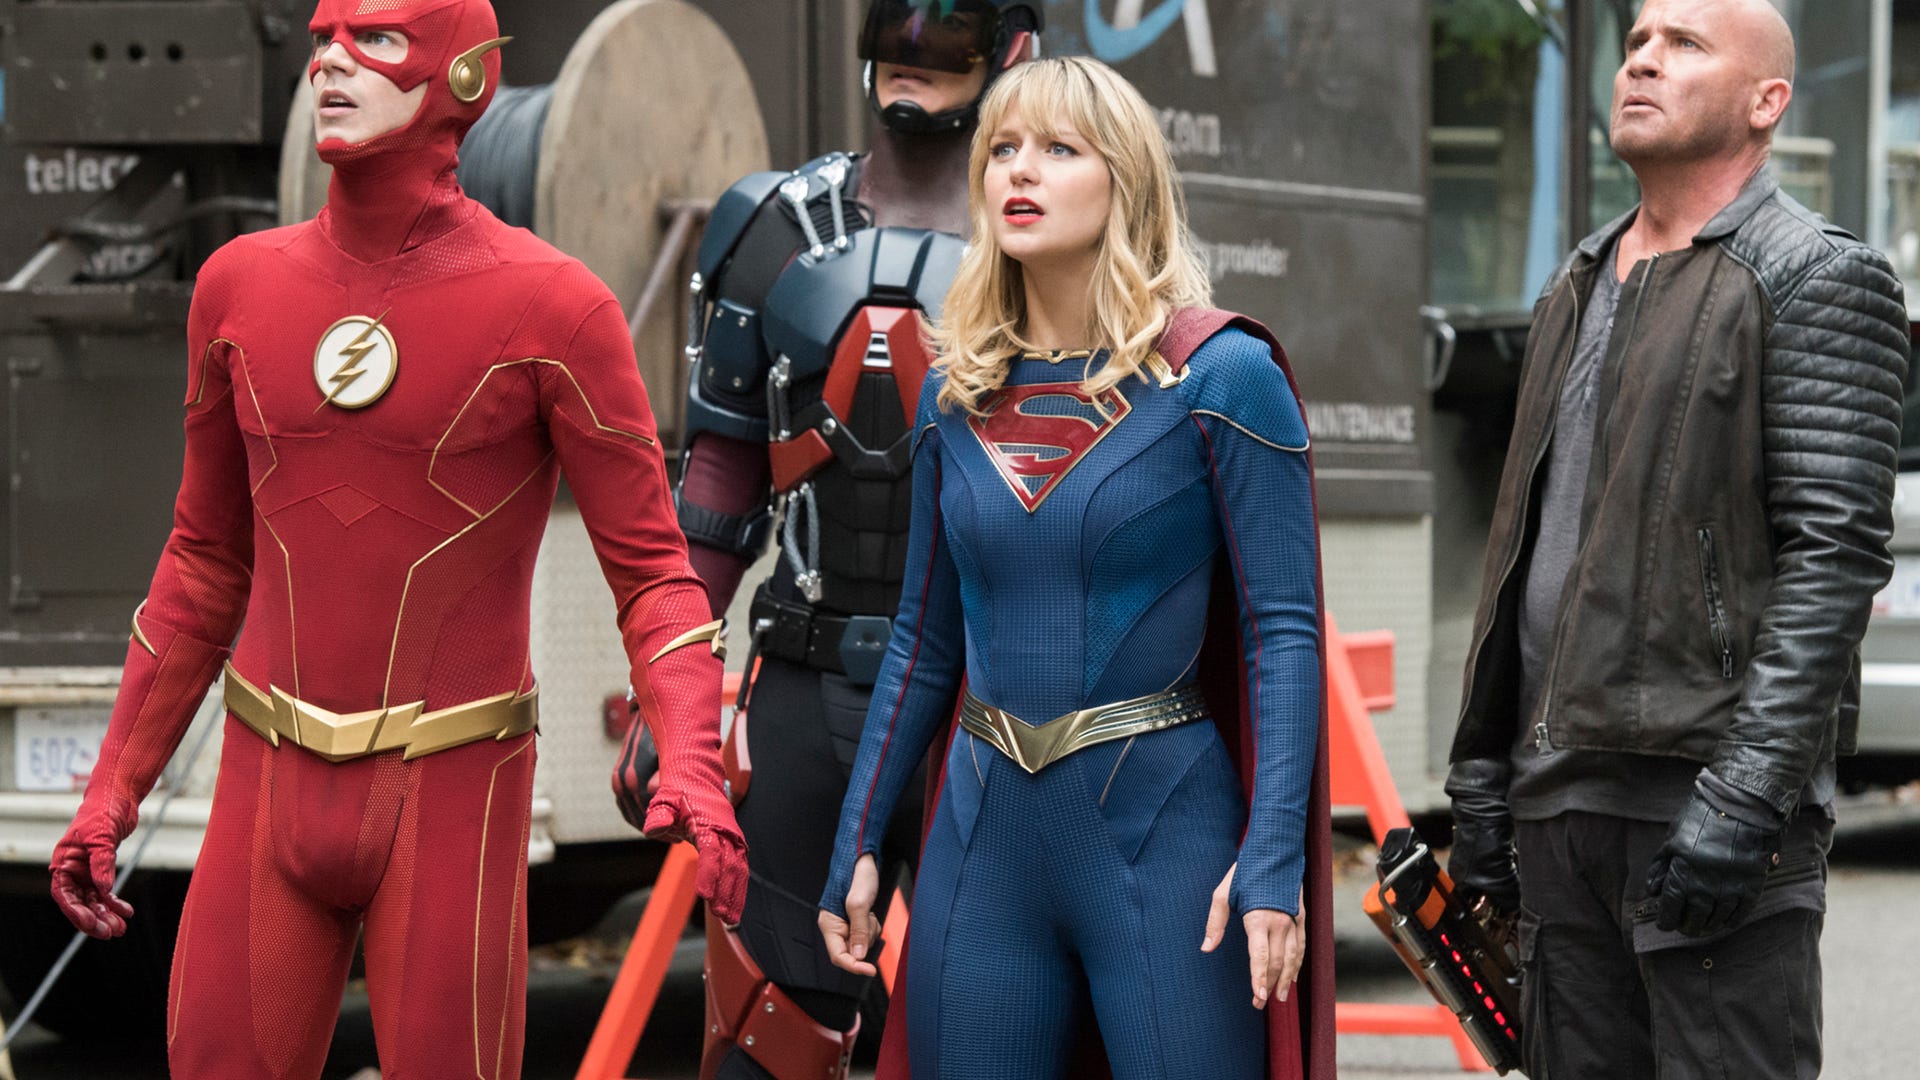 Grant Gustin, Brandon Routh, Melissa Benoist, and Dominic Purcell, Crisis on Infinite Earths